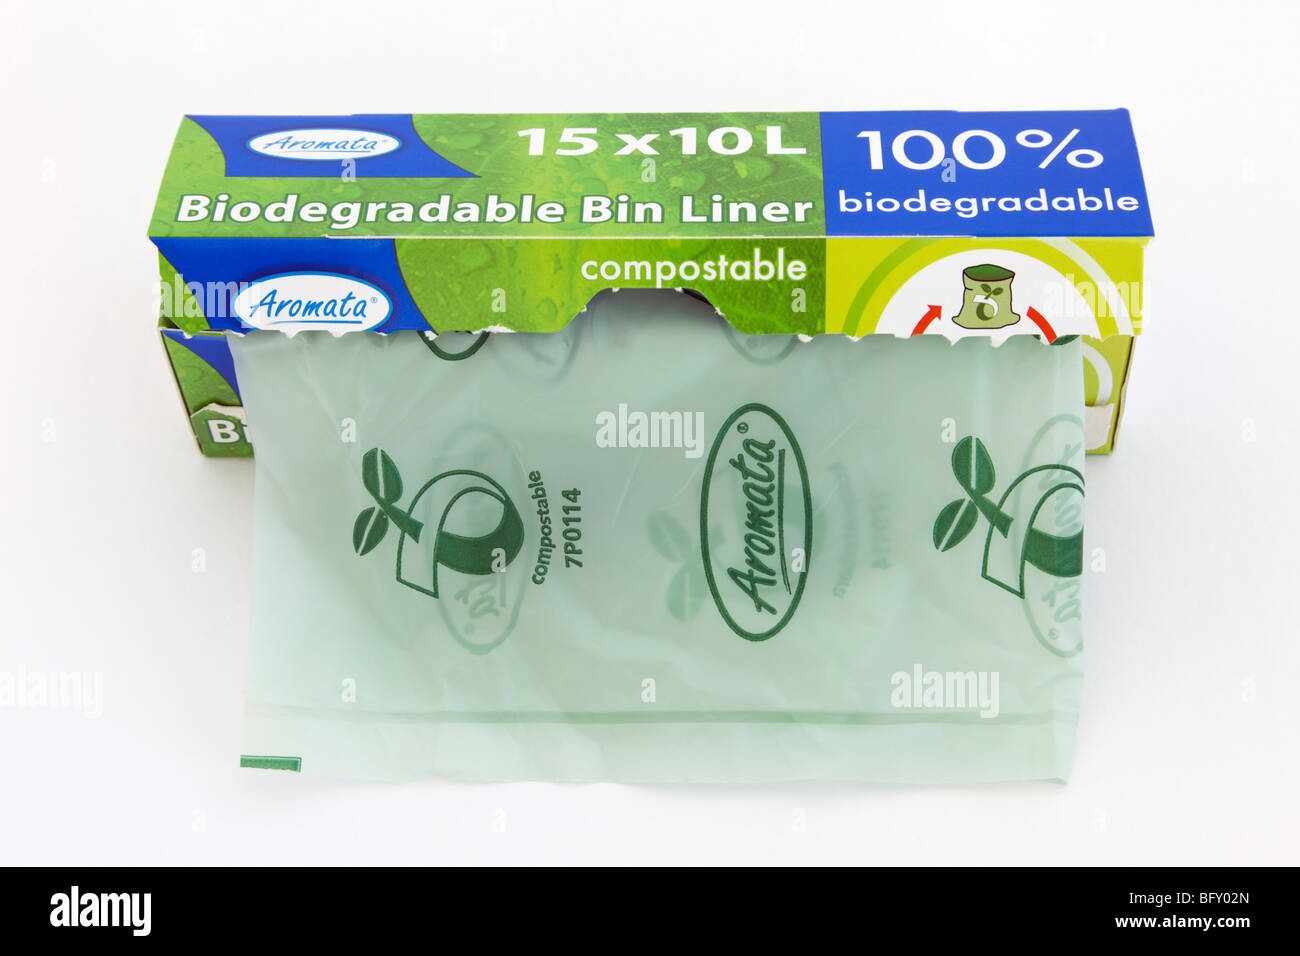 Box dispenser of Aromata 100% biodegradable and compostable plastic bin liners for food waste on a plain white background. England UK Britain Stock Photo